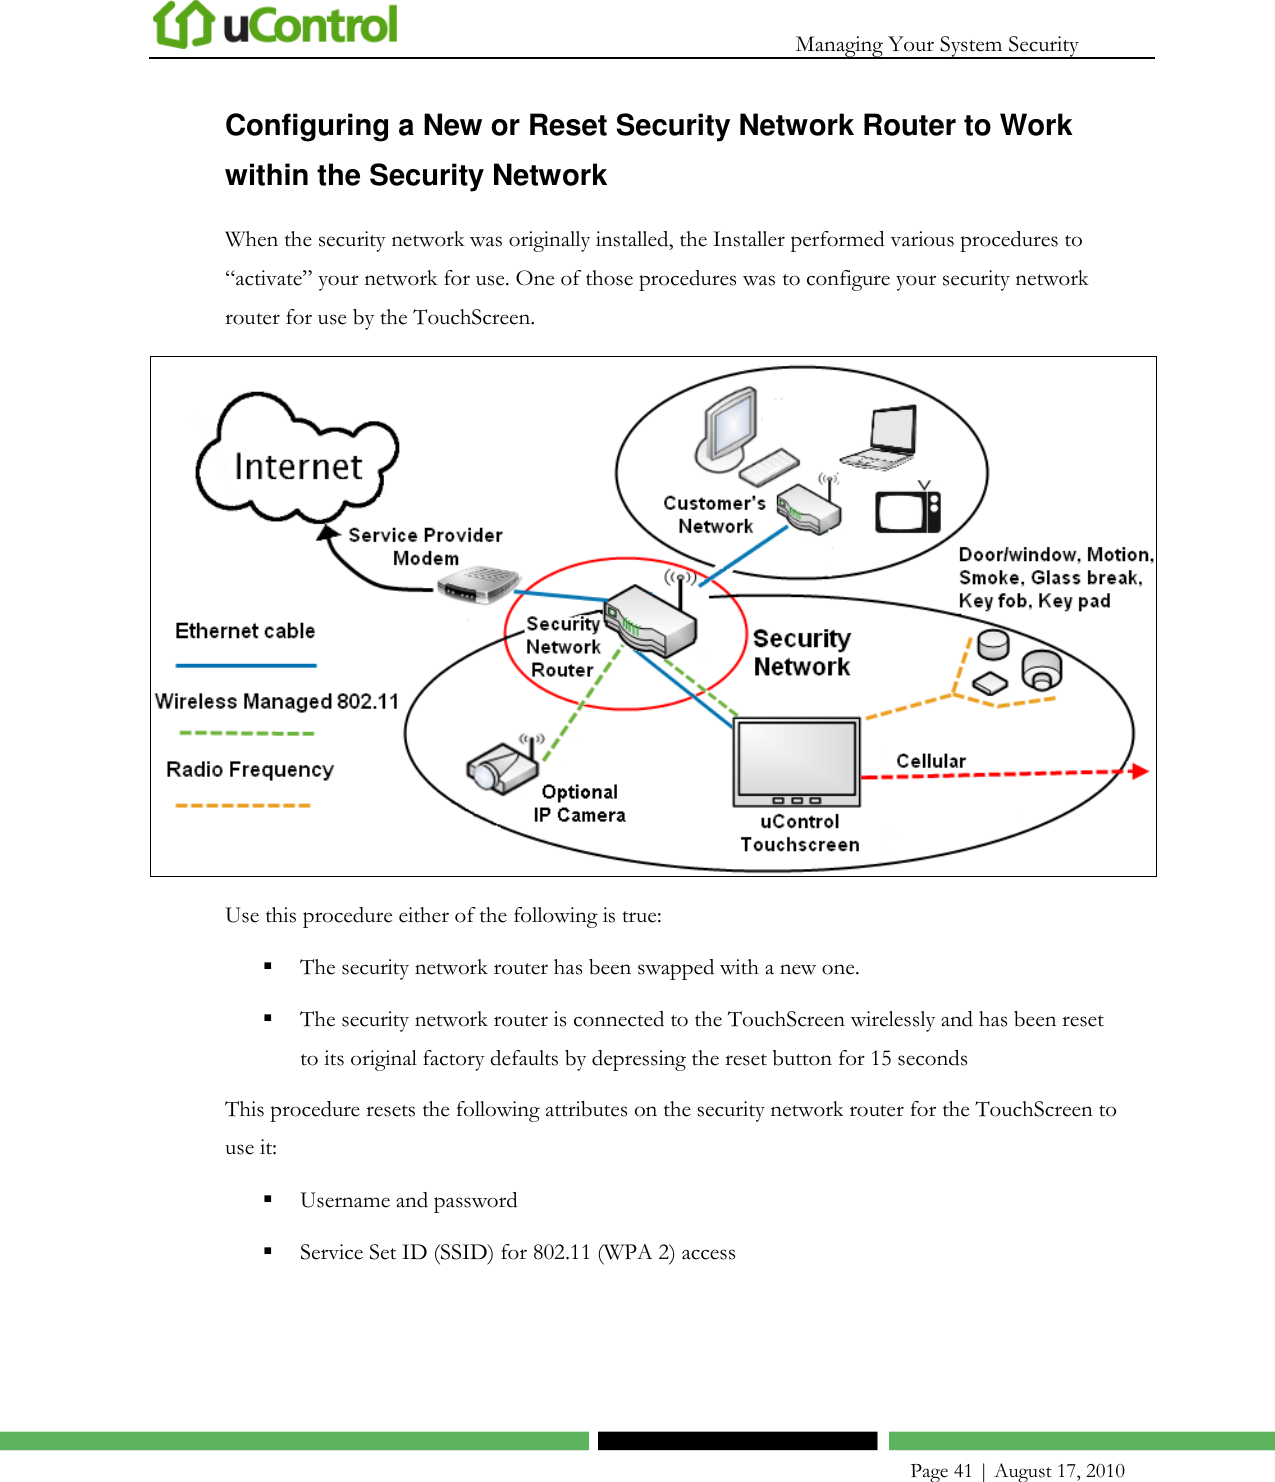   Managing Your System Security    Page 41 | August 17, 2010 Configuring a New or Reset Security Network Router to Work within the Security Network When the security network was originally installed, the Installer performed various procedures to ―activate‖ your network for use. One of those procedures was to configure your security network router for use by the TouchScreen.   Use this procedure either of the following is true:  The security network router has been swapped with a new one.   The security network router is connected to the TouchScreen wirelessly and has been reset to its original factory defaults by depressing the reset button for 15 seconds This procedure resets the following attributes on the security network router for the TouchScreen to use it:  Username and password  Service Set ID (SSID) for 802.11 (WPA 2) access 